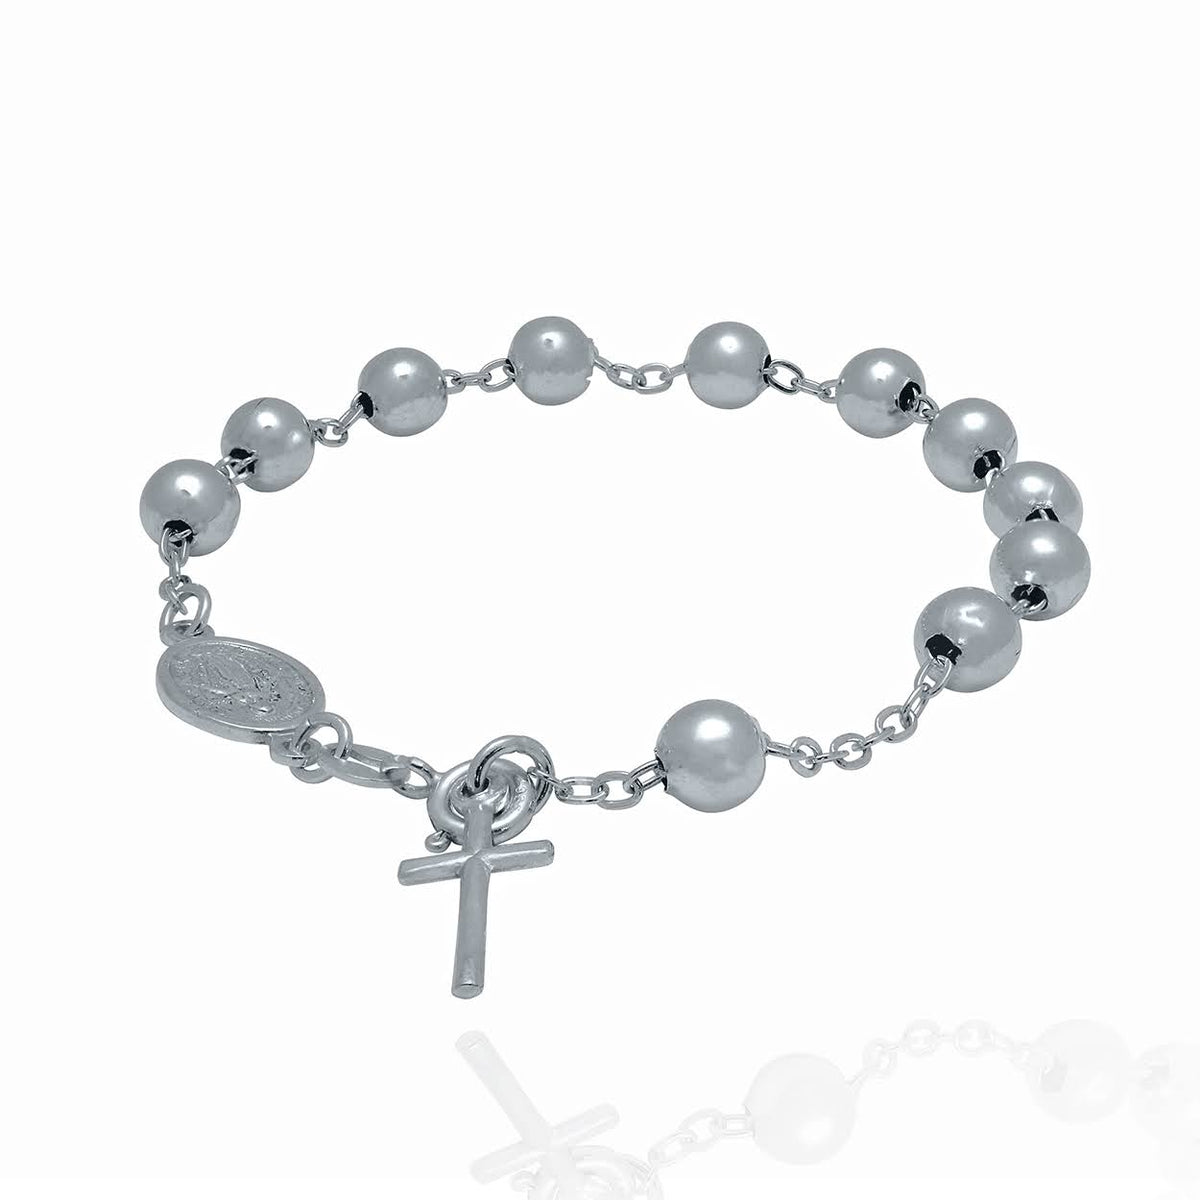 Sterling Silver Rosary Bracelet with Immaculate Conception Medallion Attached